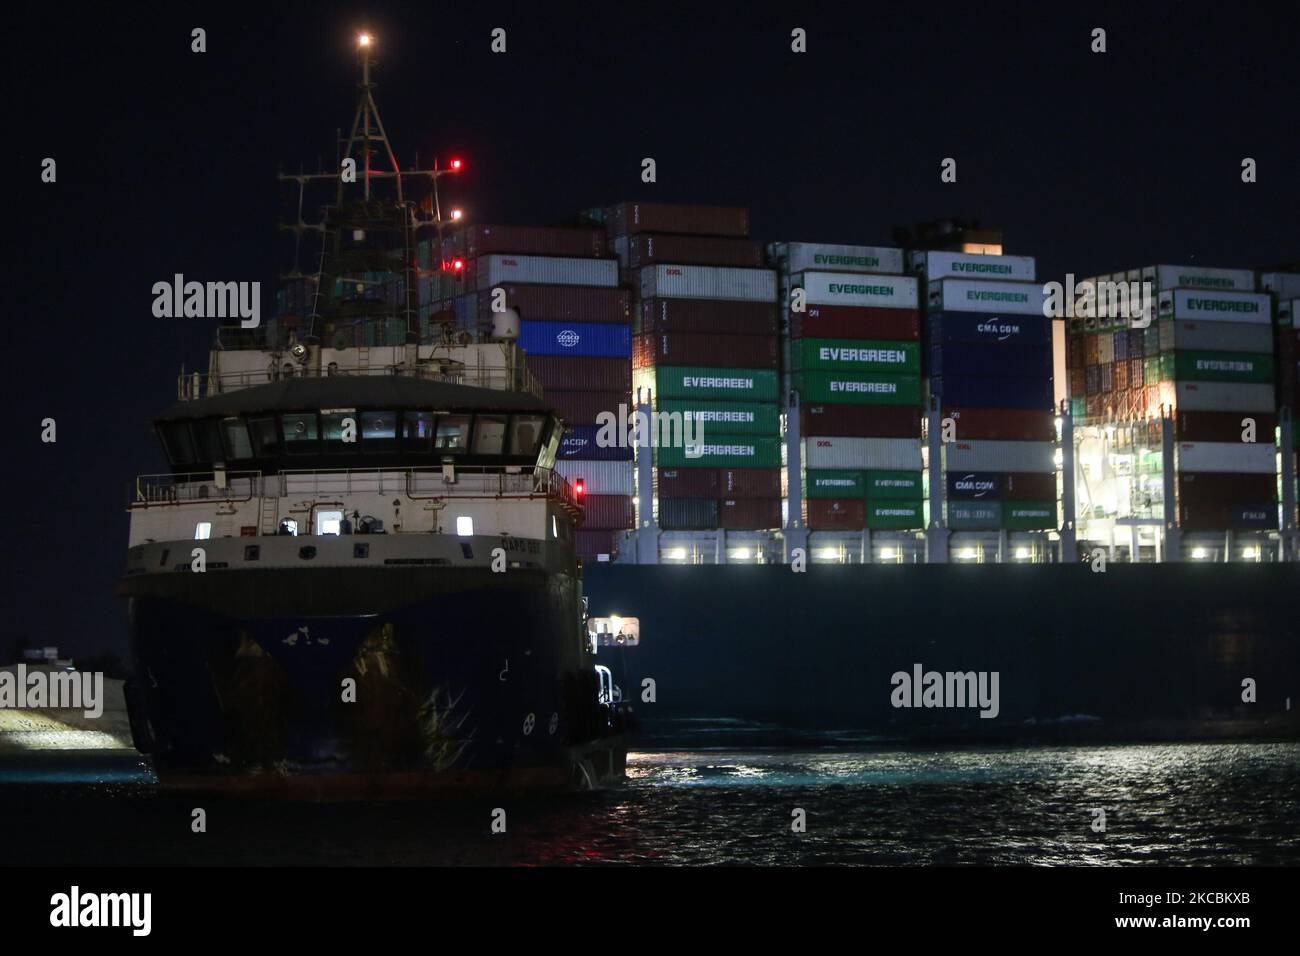 A general view of ''Ever Given'', a container ship which is currently stuck in the Suez canal, during a tugging attempt to re-float it, in Suez, Egypt, on March 27, 2021. The state-run Suez Canal Authority (SCA) announced that nearly 17,000 cubic meters of sand have been dredged around the ship after navigation through the Suez Canal has been temporarily stoped which has been wedged diagonally across the span of the canal about six kilometres north of the Suez Canal's entrance by the Red Sea port city of Suez since March 23, blocking the waterway in both directions (Photo by Ziad Ahmed/NurPhot Stock Photo